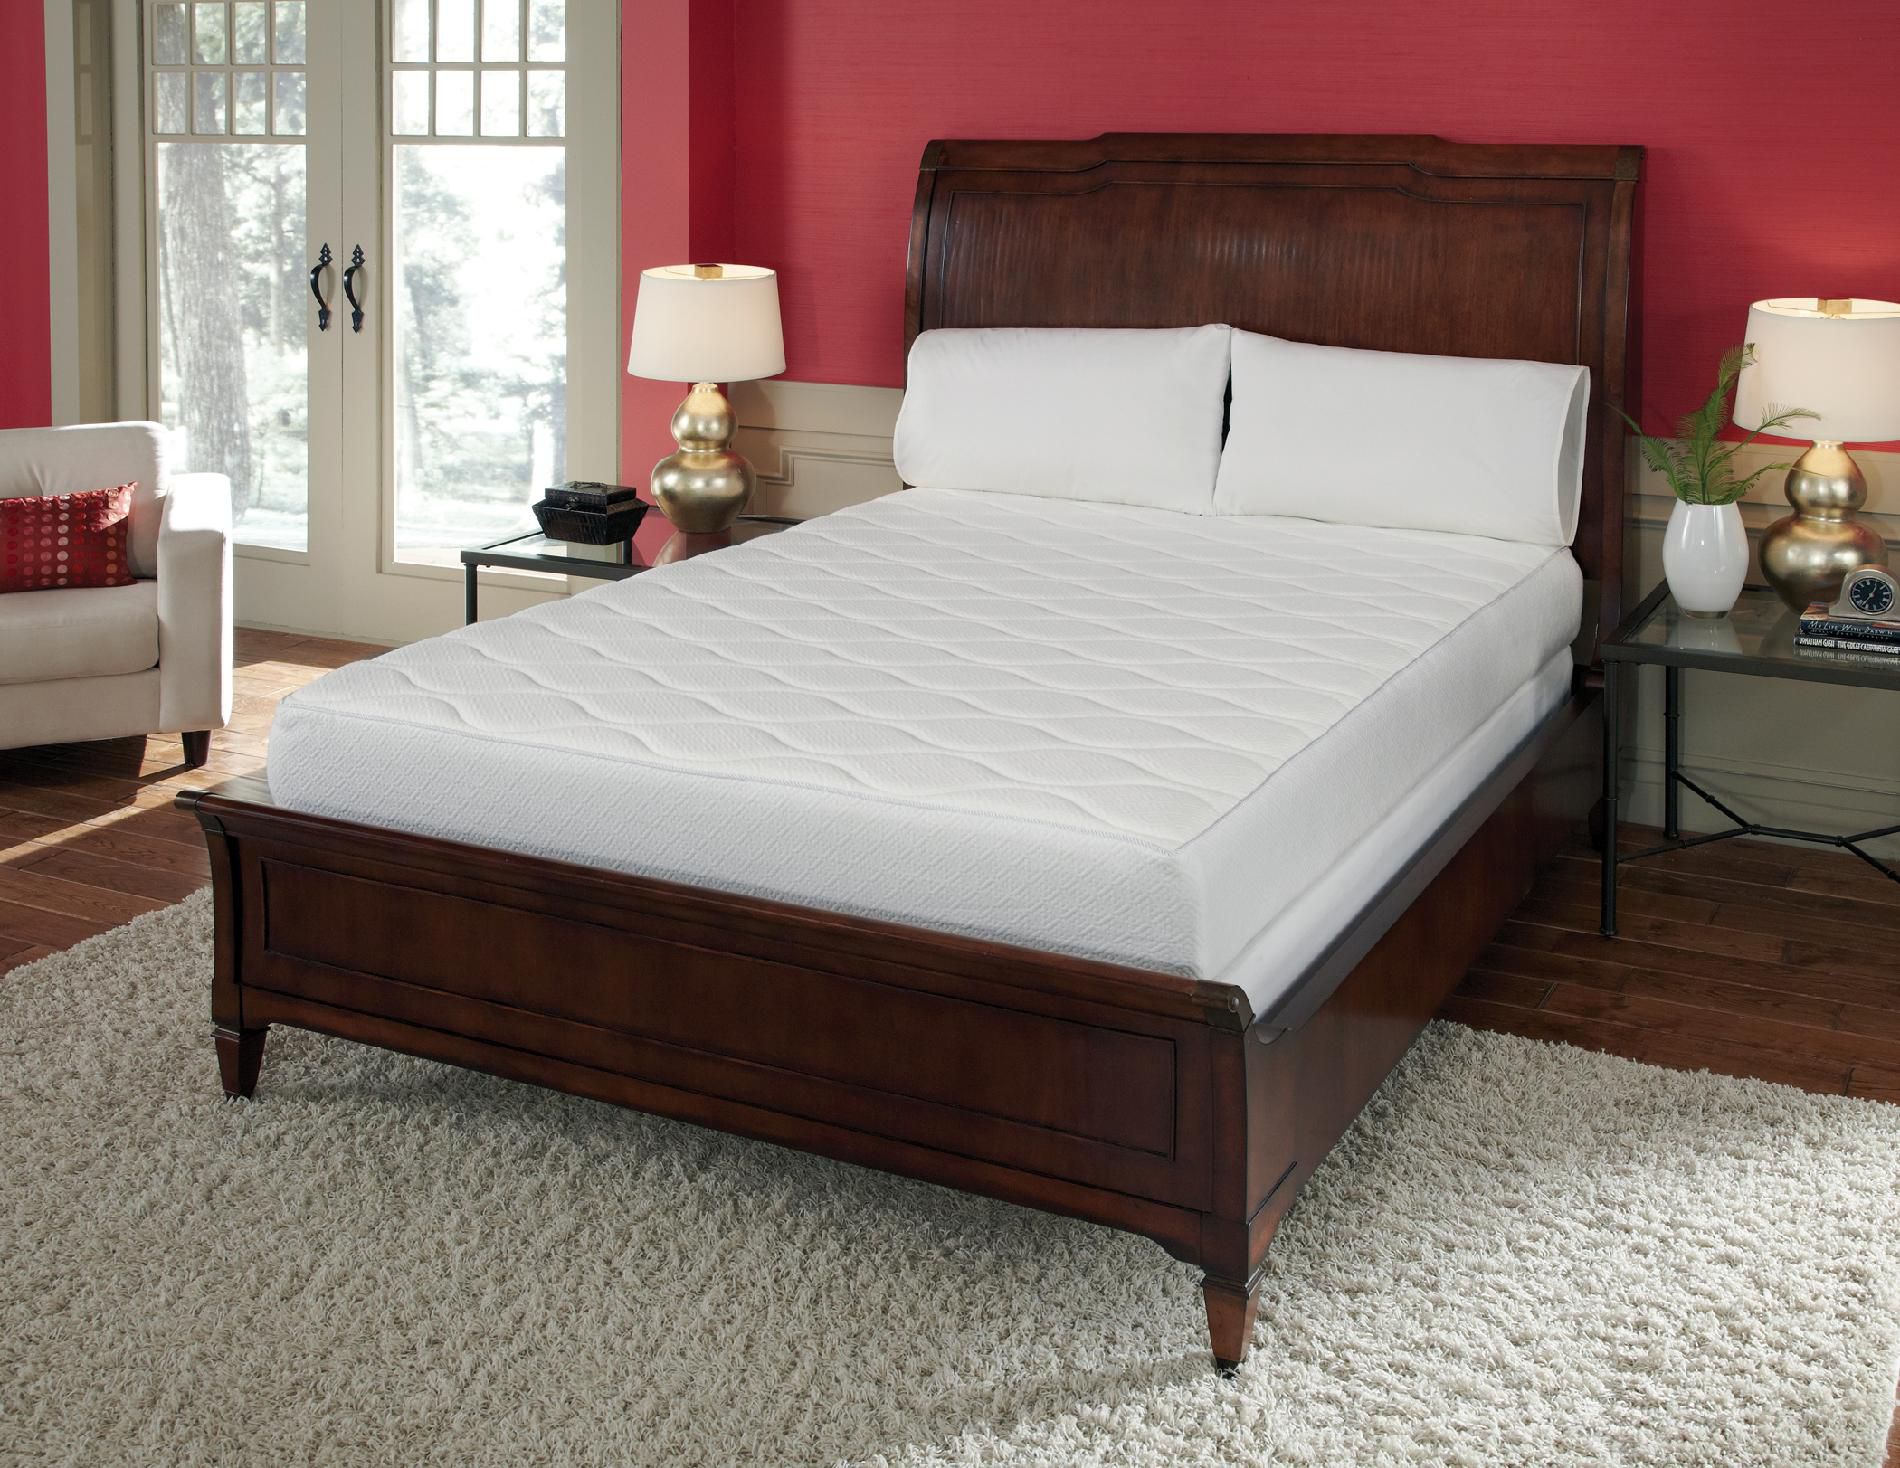 Rio Home Fashions 10 in. Top Quilted Mattress, Queen